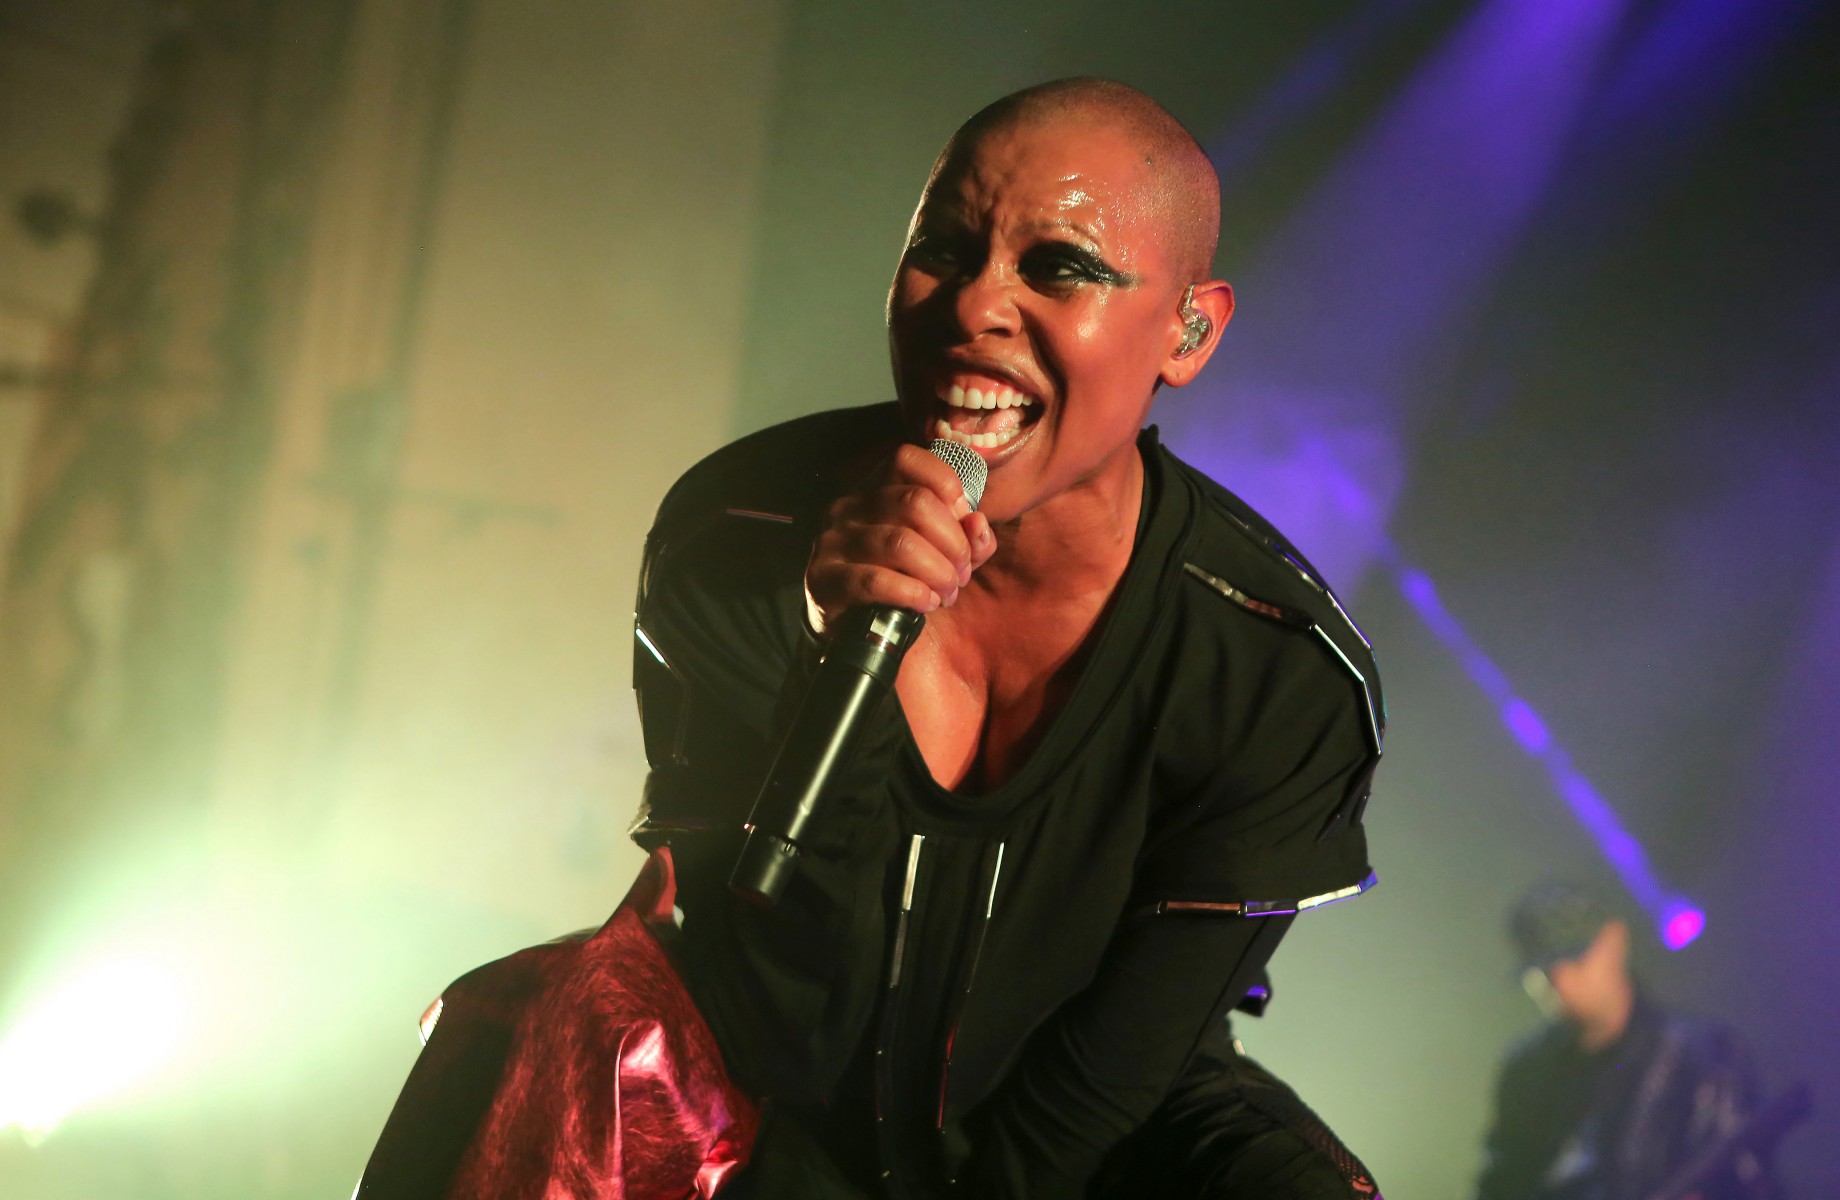 Viewers are convinced the duck is Skin of Skunk Anansie